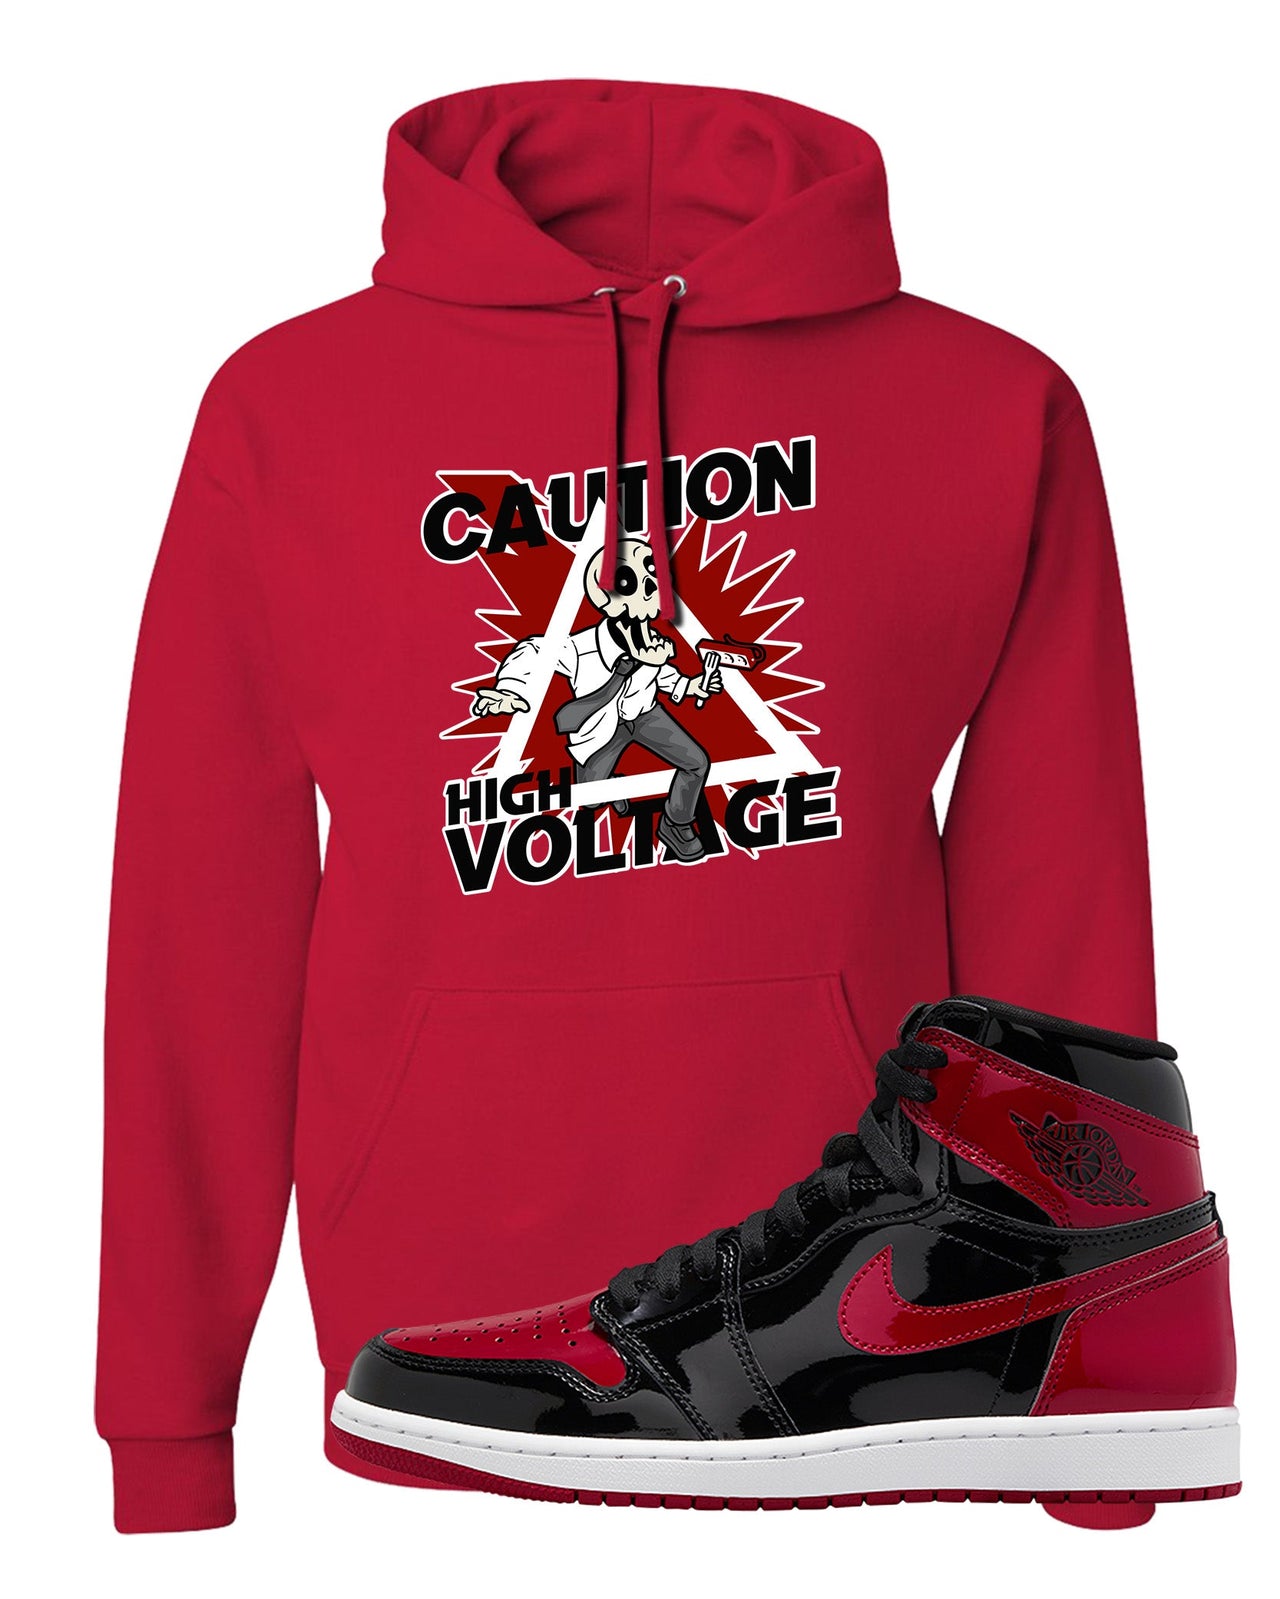 Patent Bred 1s Hoodie | Caution High Voltage, Red